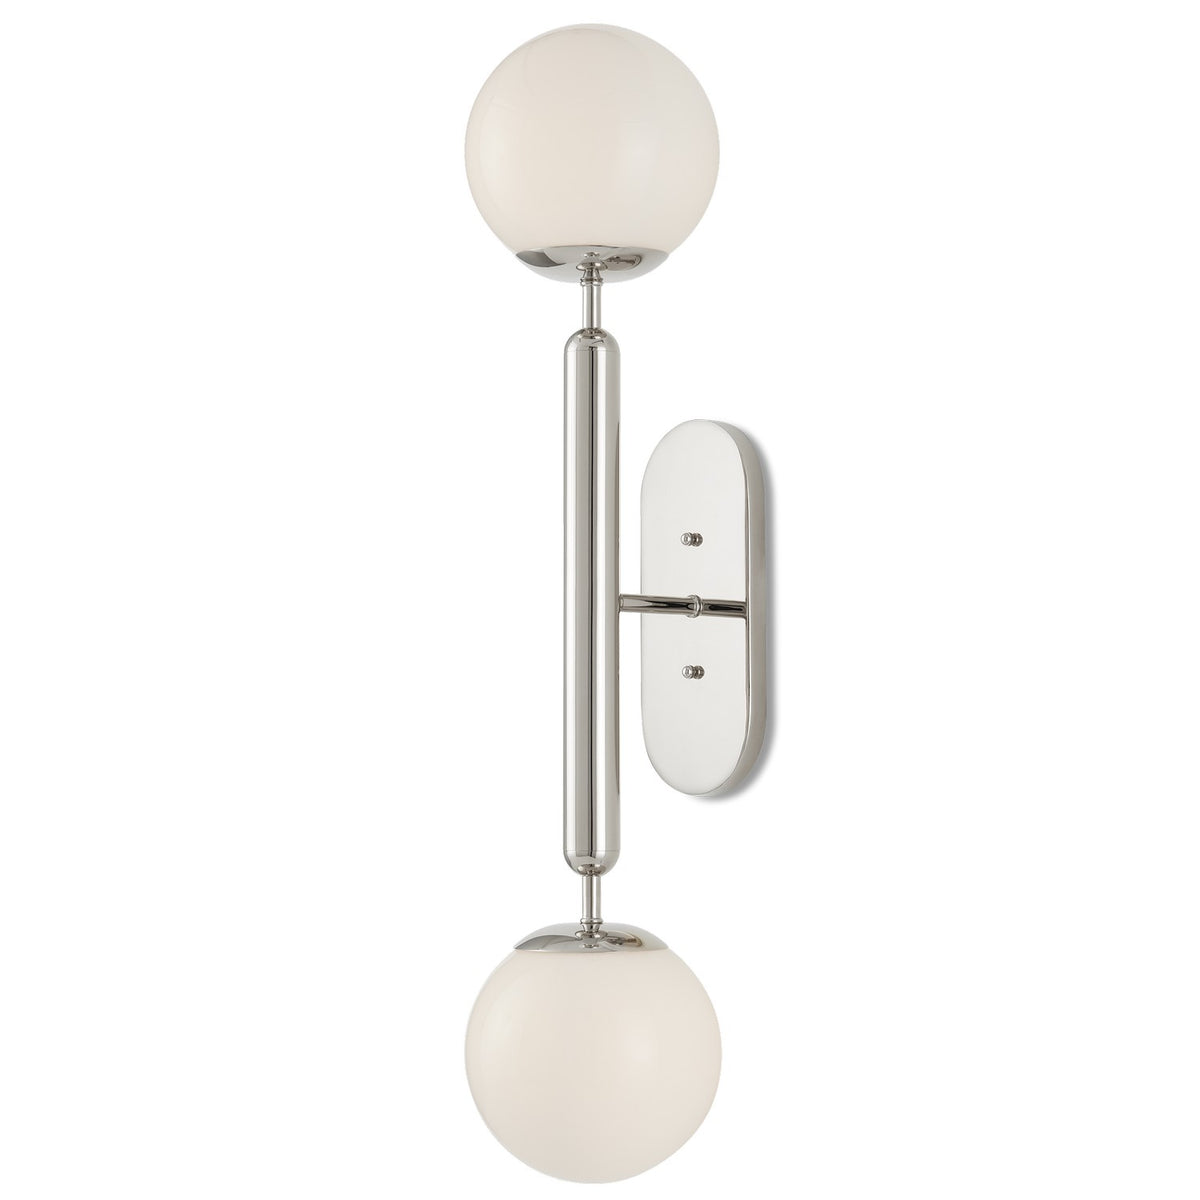 Currey and Company - 5800-0033 - Two Light Wall Sconce - Polished Nickel/White